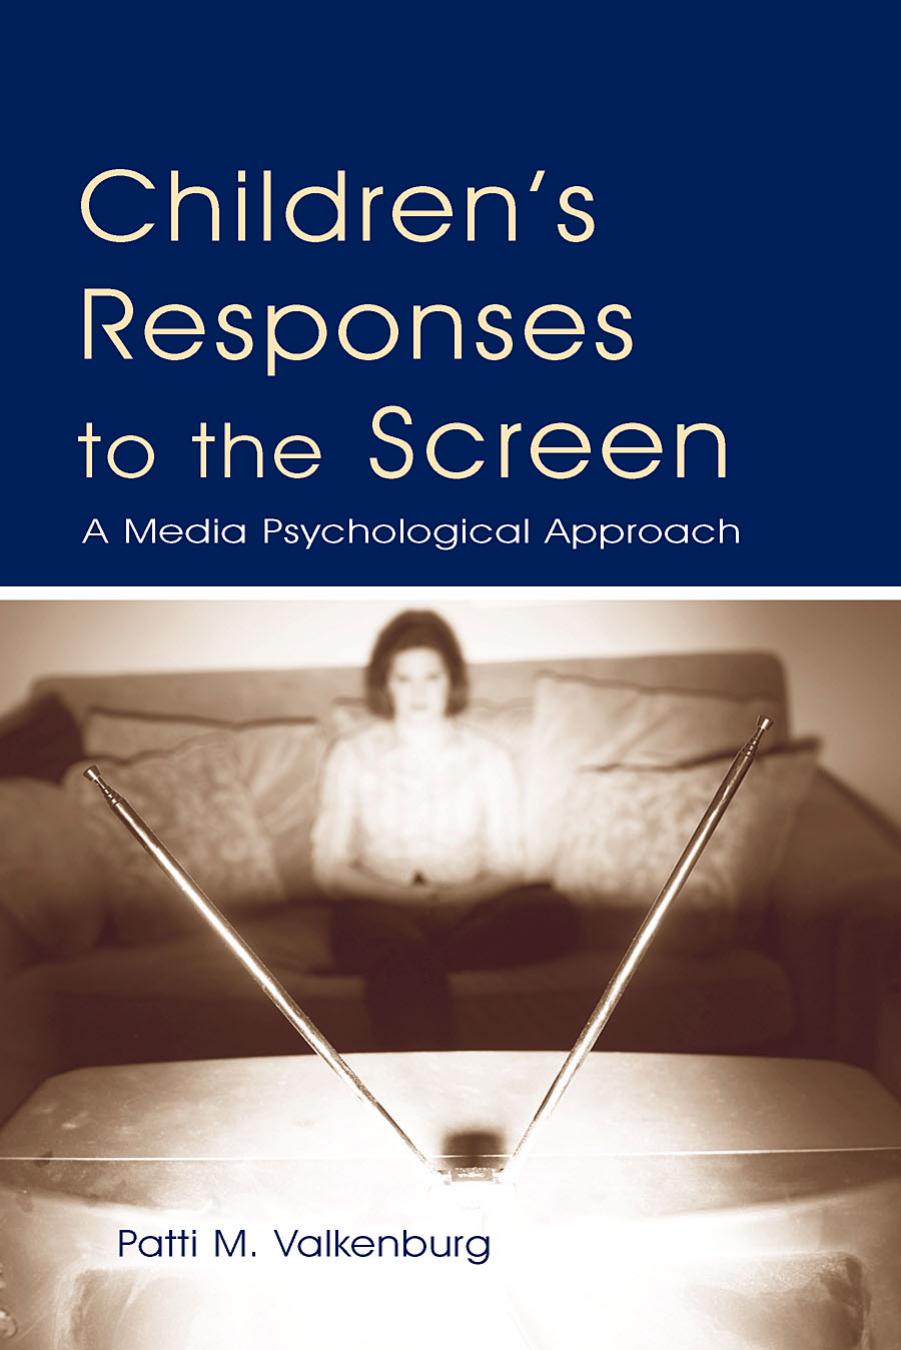 Children's Responses to the Screen: A Media Psychological Approach